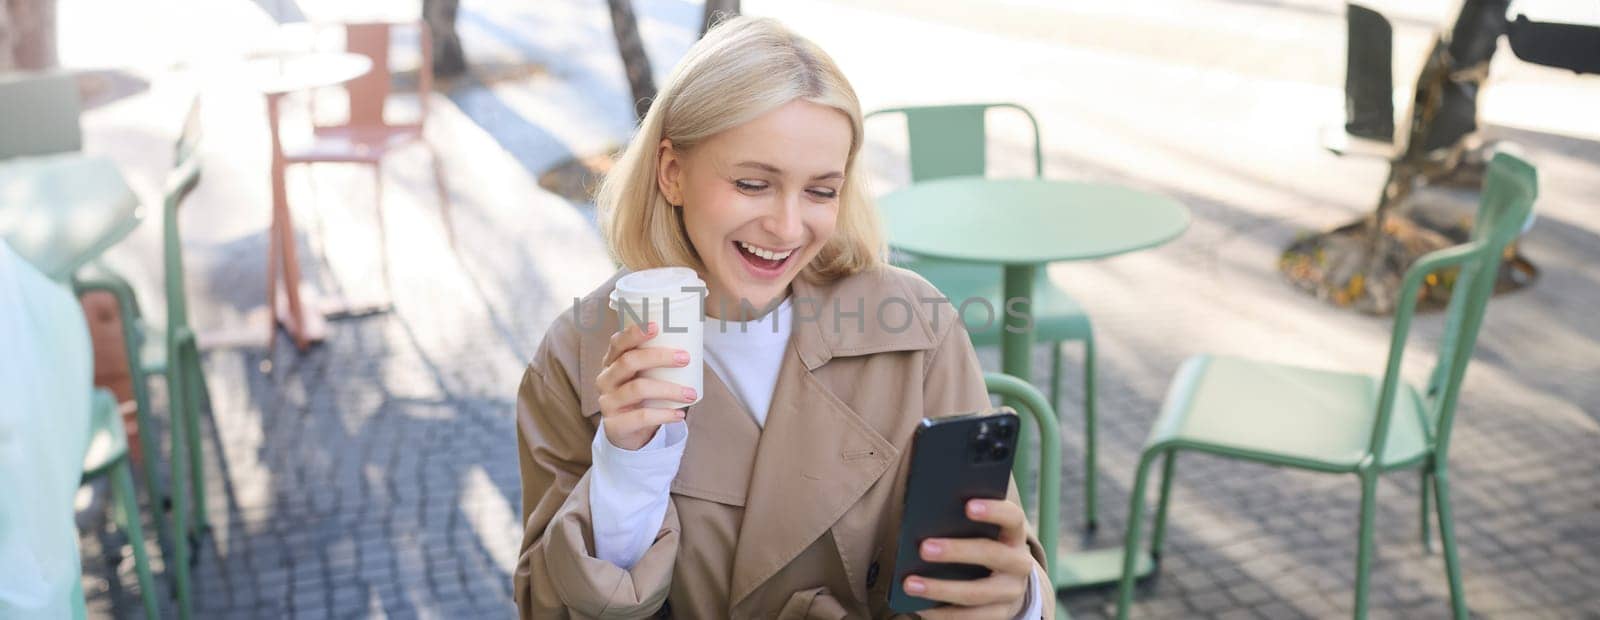 Lifestyle portrait of smiling young woman, sitting outdoors with coffee drink, looking at smartphone with happy, excited face expression. Technology and people concept